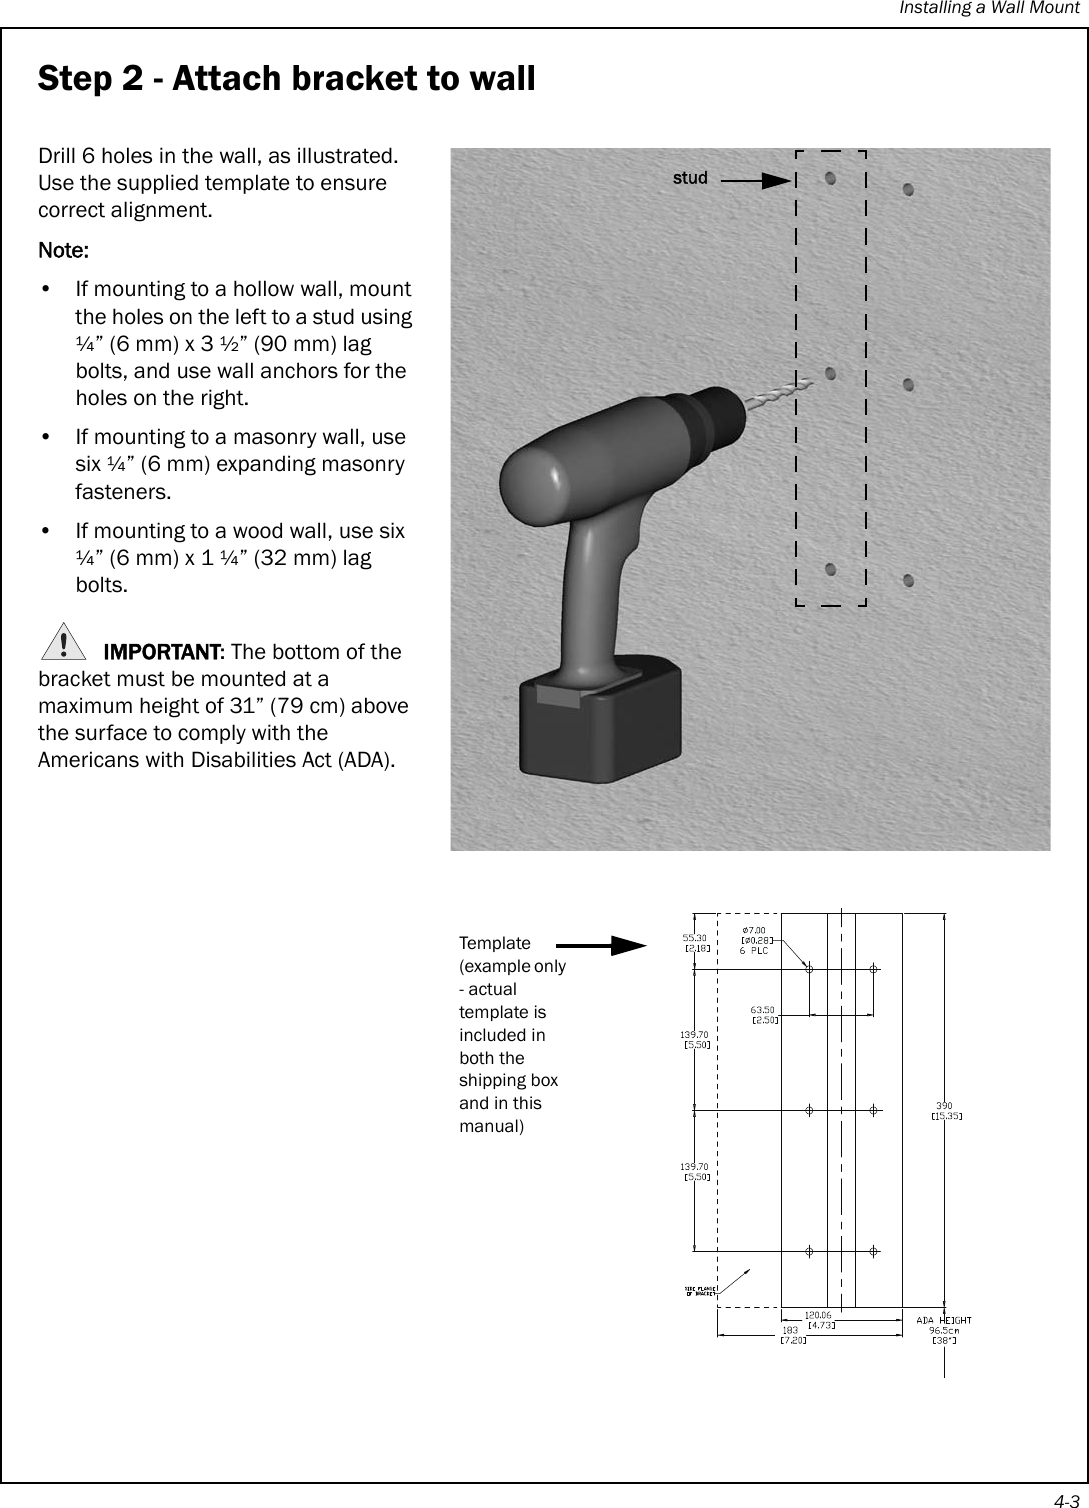 Installing a Wall Mount4-3Step 2 - Attach bracket to wallDrill 6 holes in the wall, as illustrated. Use the supplied template to ensure correct alignment.Note:• If mounting to a hollow wall, mount the holes on the left to a stud using ¼” (6 mm) x 3 ½” (90 mm) lag bolts, and use wall anchors for the holes on the right.• If mounting to a masonry wall, use six ¼” (6 mm) expanding masonry fasteners.• If mounting to a wood wall, use six ¼” (6 mm) x 1 ¼” (32 mm) lag bolts. IMPORTANT: The bottom of the bracket must be mounted at a maximum height of 31” (79 cm) above the surface to comply with the Americans with Disabilities Act (ADA).Template(example only - actual template is included in both the shipping box and in this manual)stud